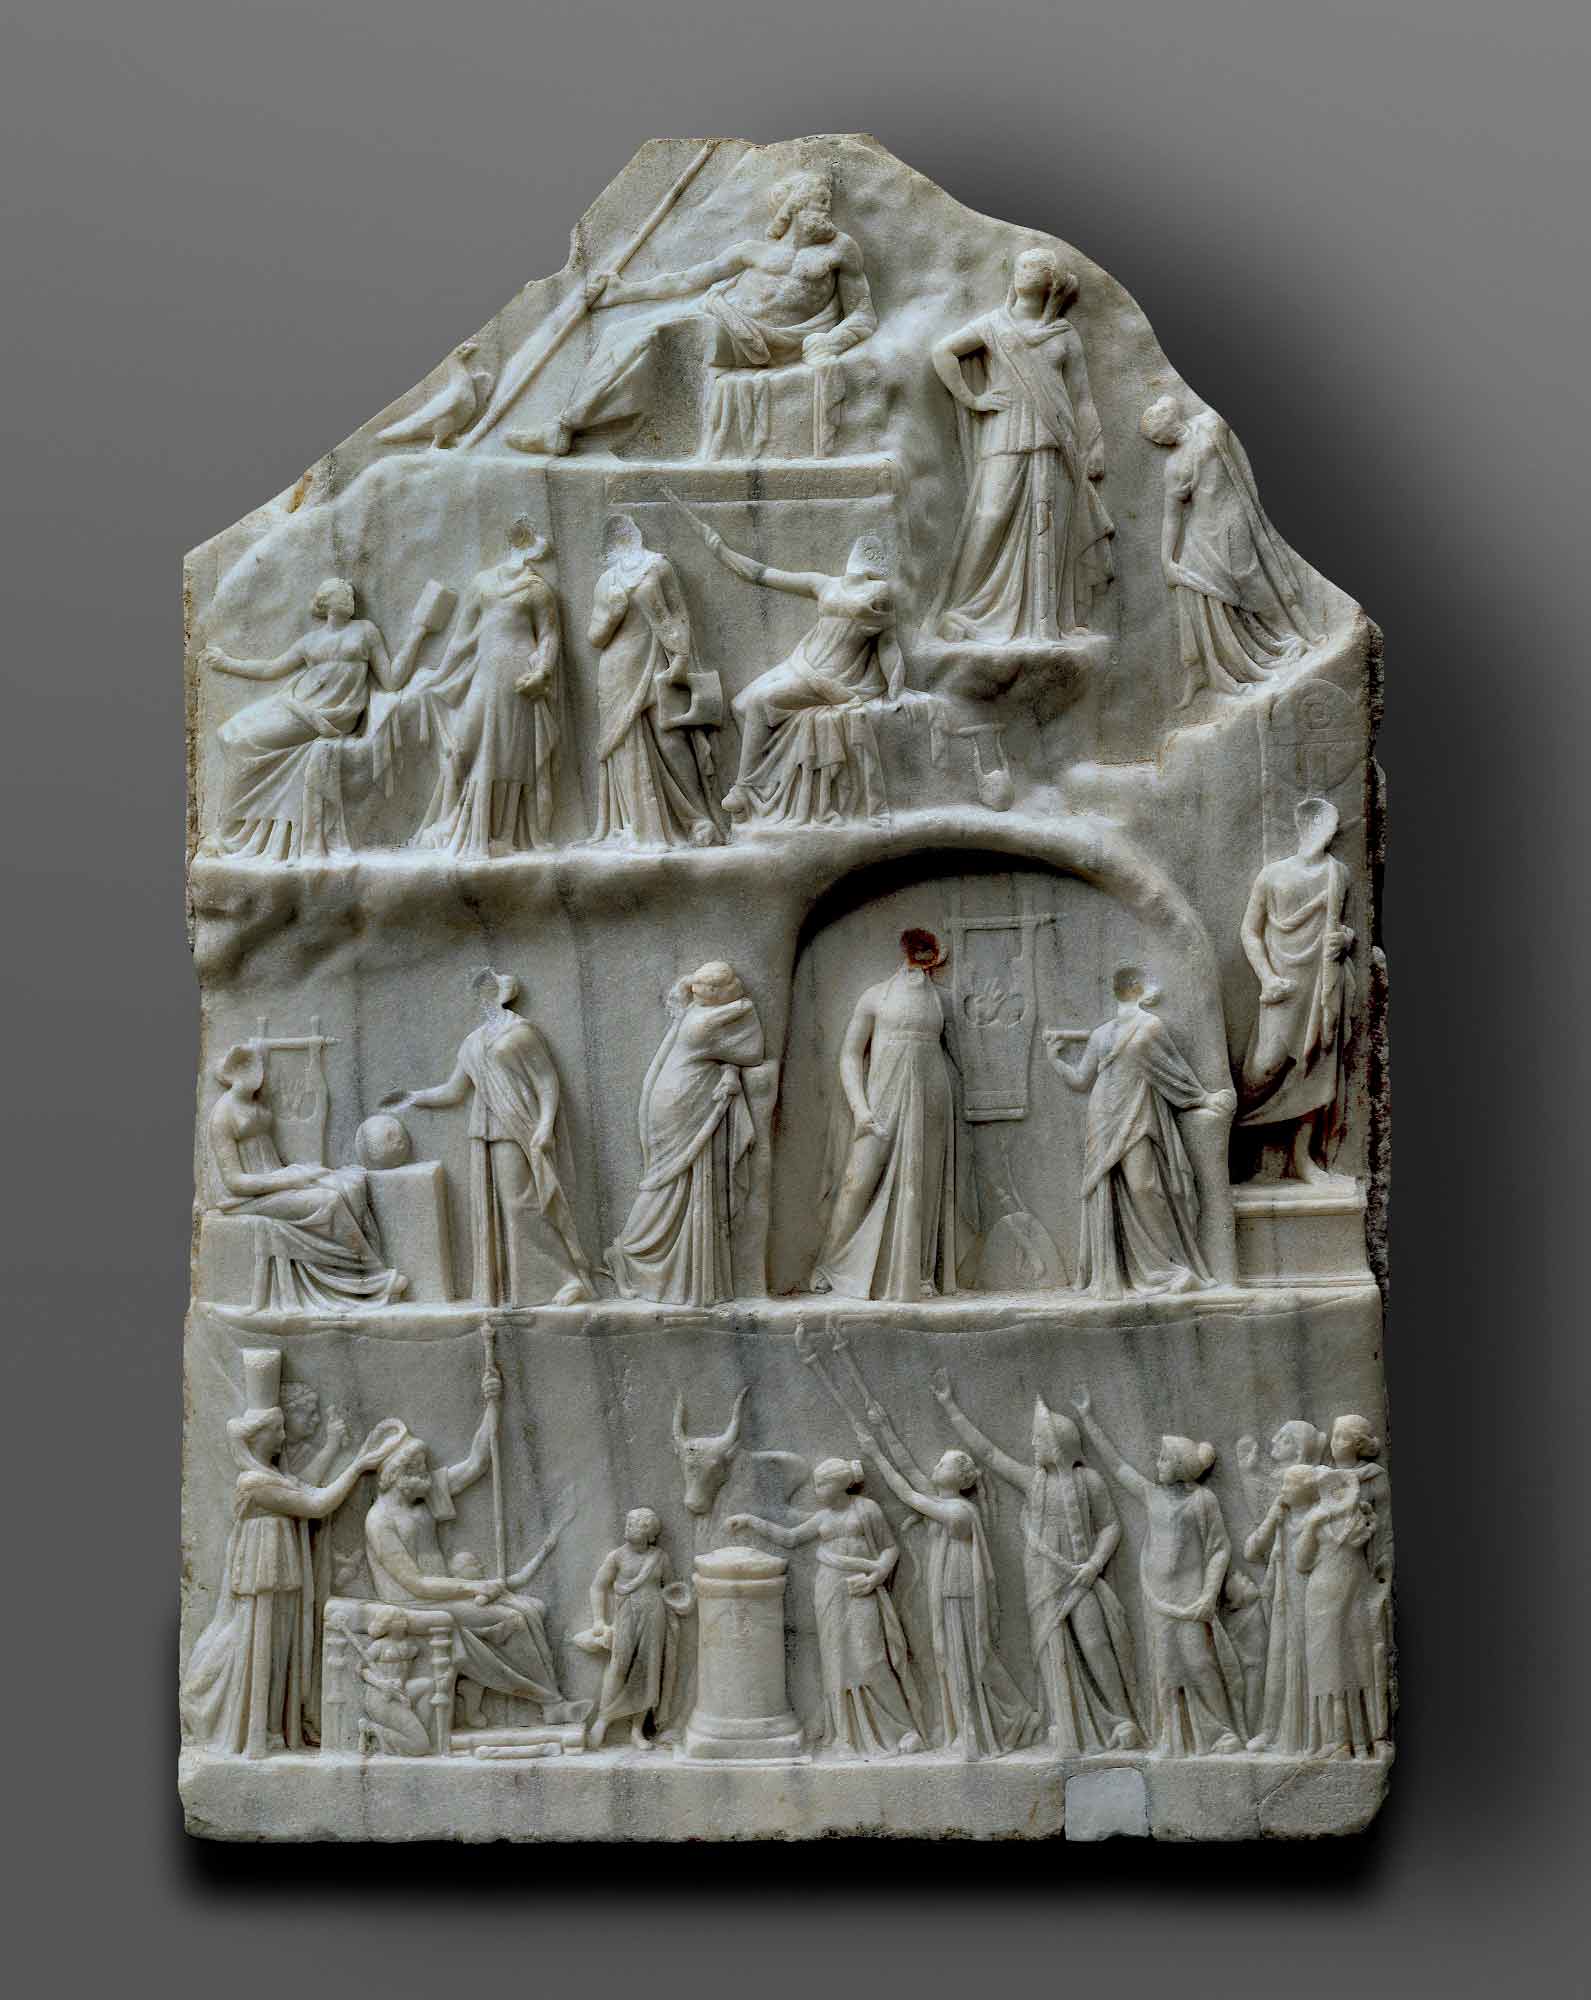 A marble block with a relief design and using a linear perspective to represent multiple figures along four rows, the top featuring a single man reclining. - click to view larger image